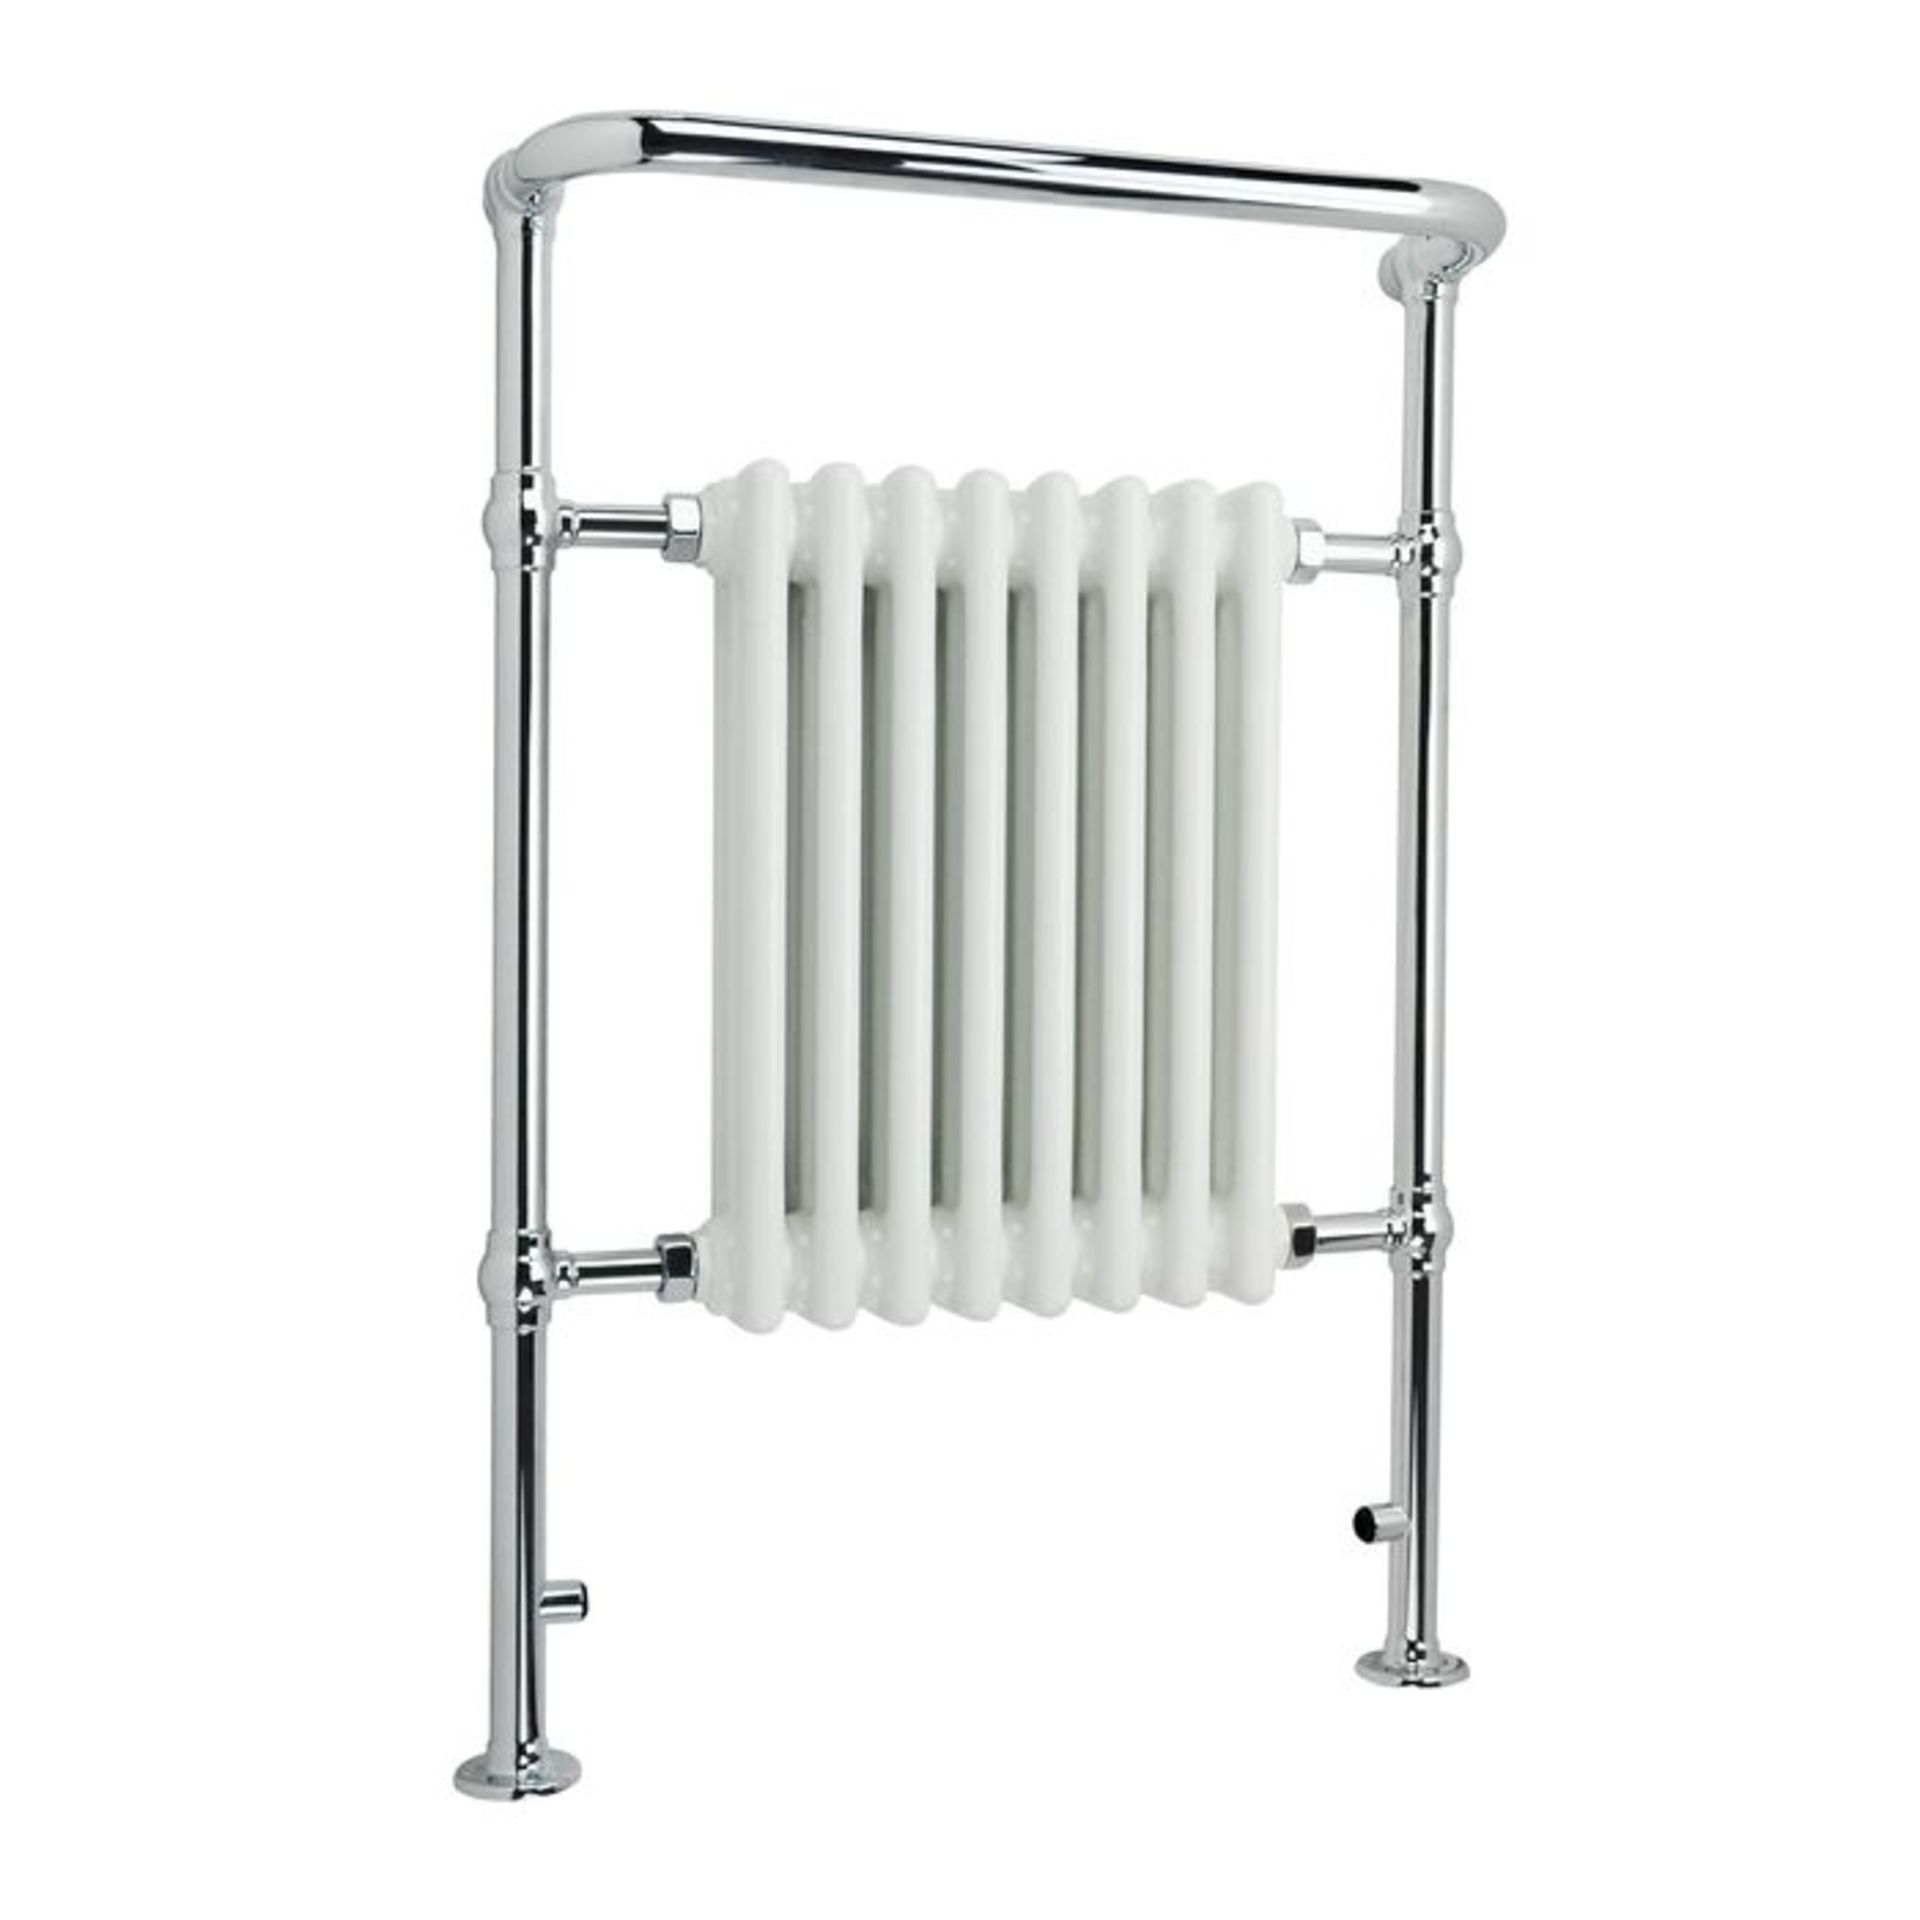 (MW7) 952x659mm Large Traditional White Premium Towel Rail Radiator. RRP £354.99. We love this - Image 3 of 3